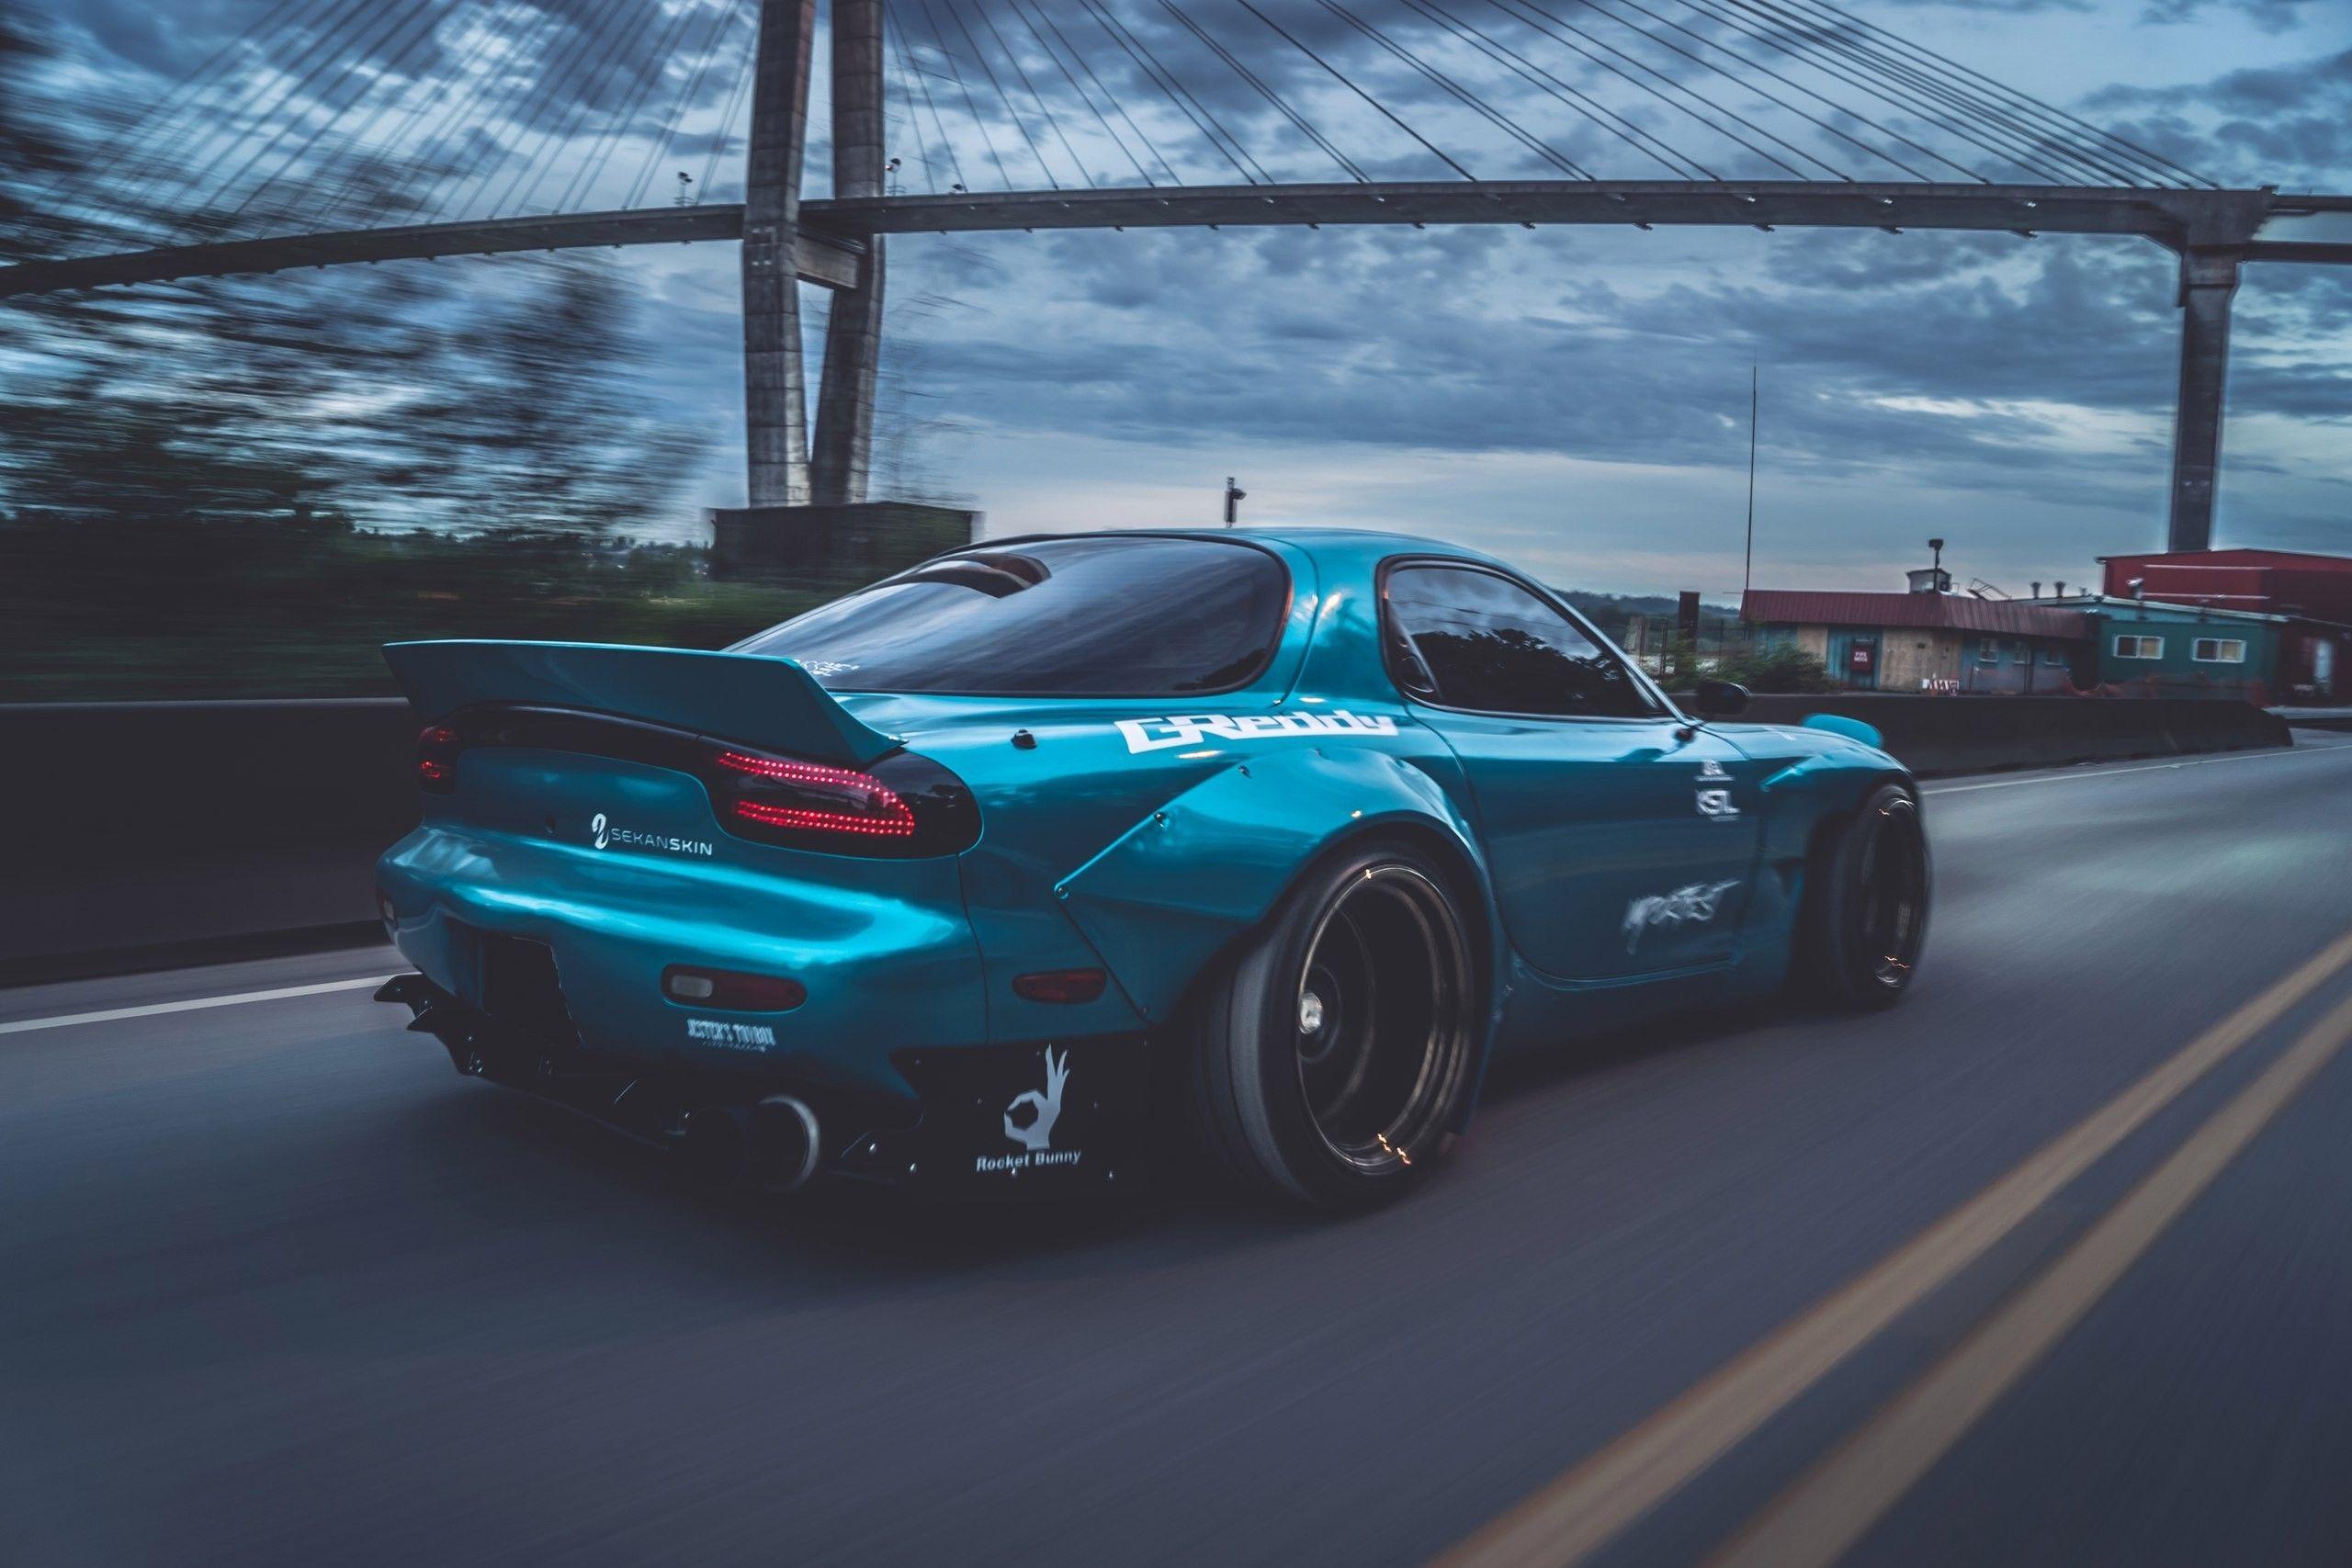 Rx 7 Wallpapers Top Free Rx 7 Backgrounds Wallpaperaccess